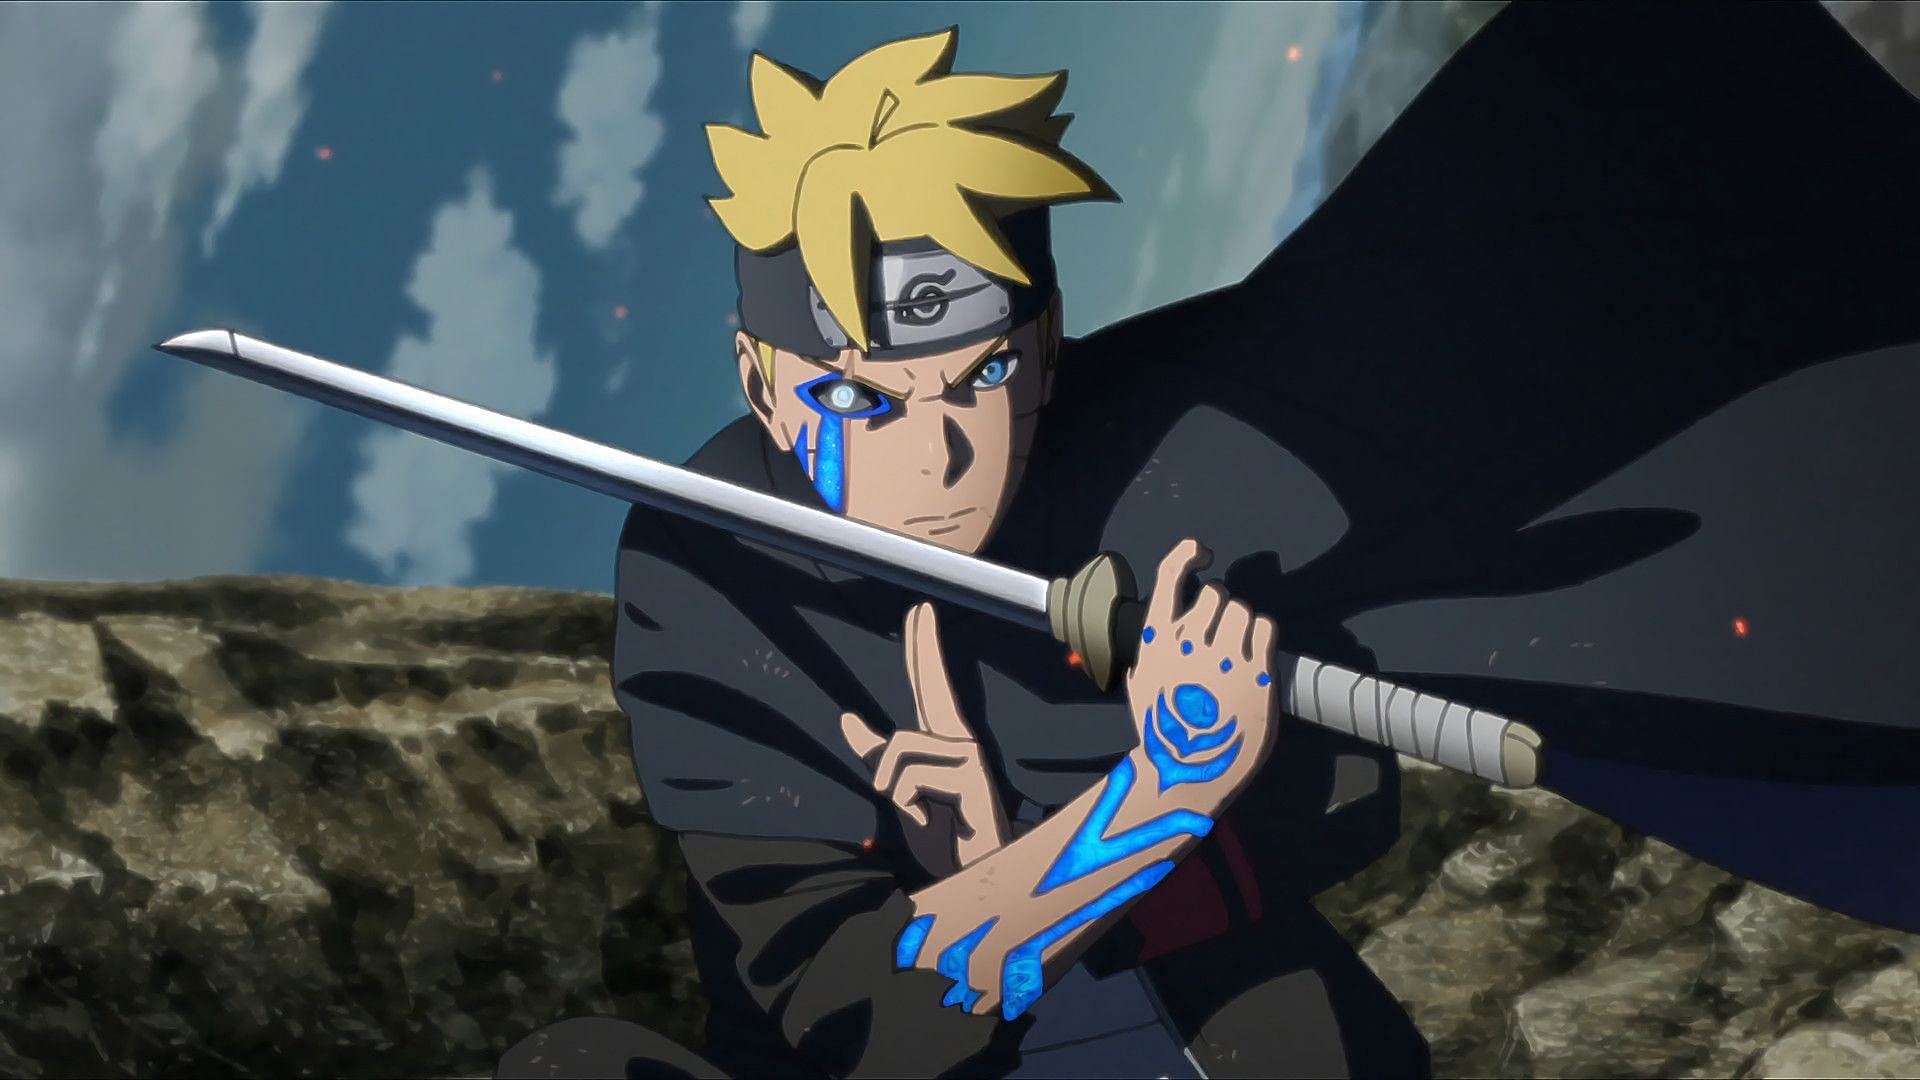 What do you think is the strongest Kekkei genkai in Boruto at the moment  and wy? : r/Boruto